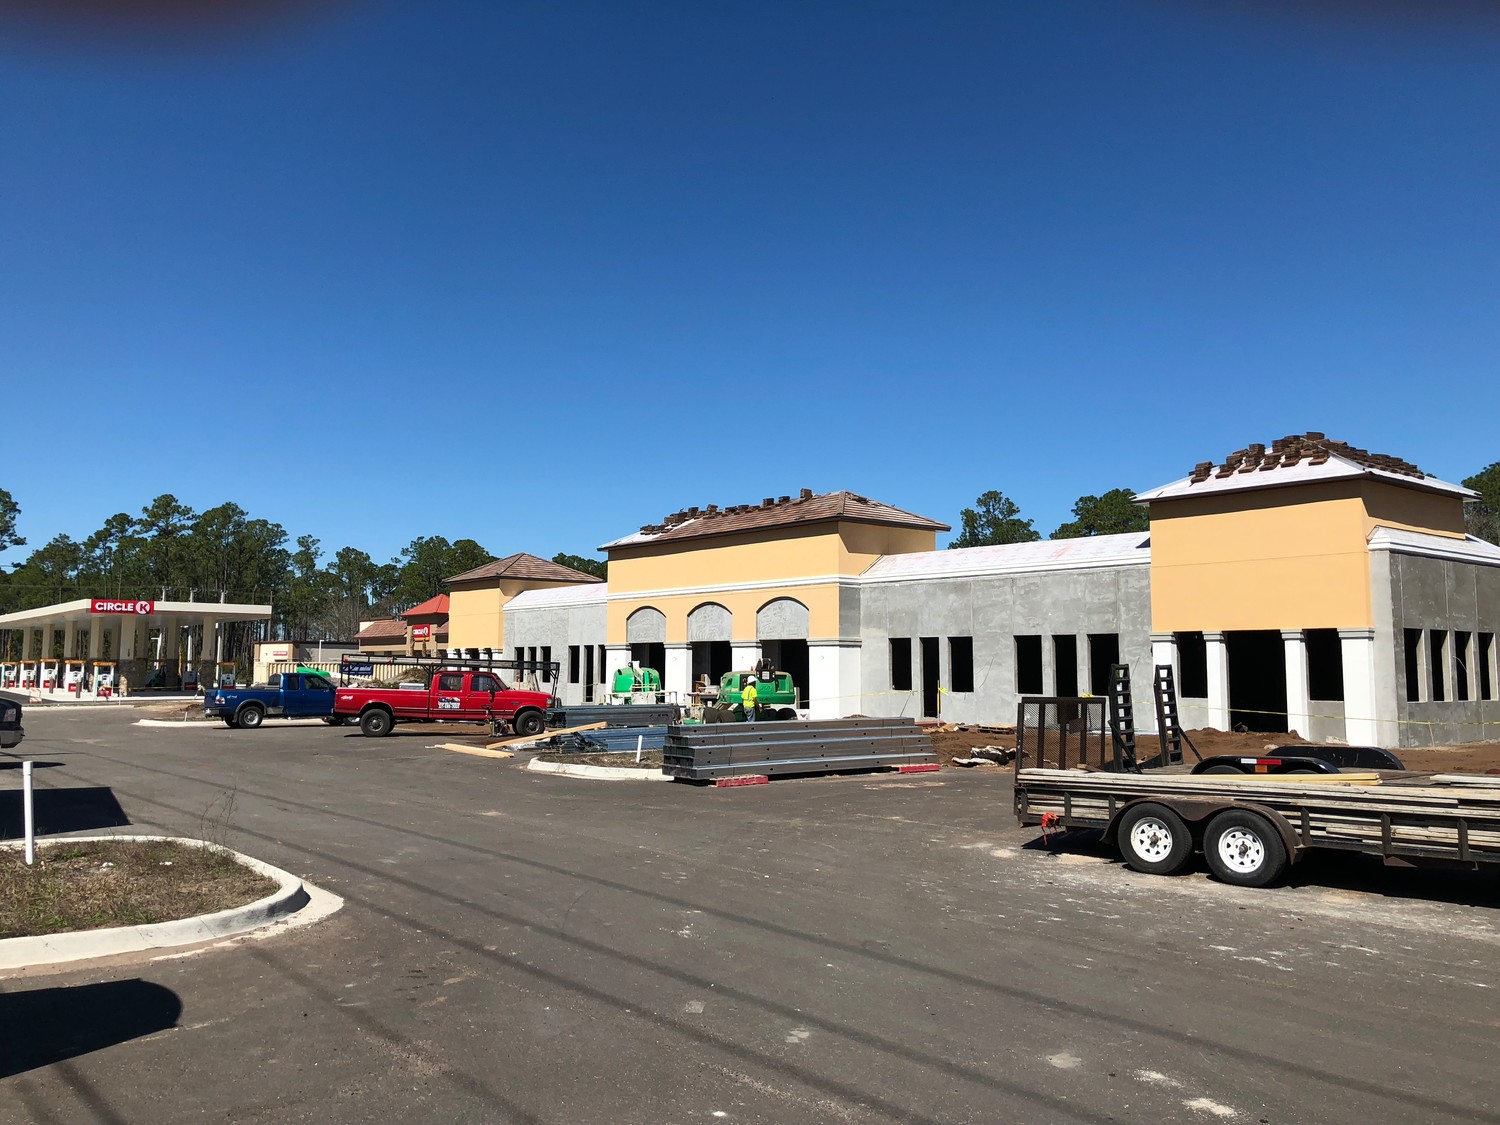 Construction takes place on Gateway Village Center, which will include a Circle K convenience store and gas station, retail center and freestanding Heartland Dental office.